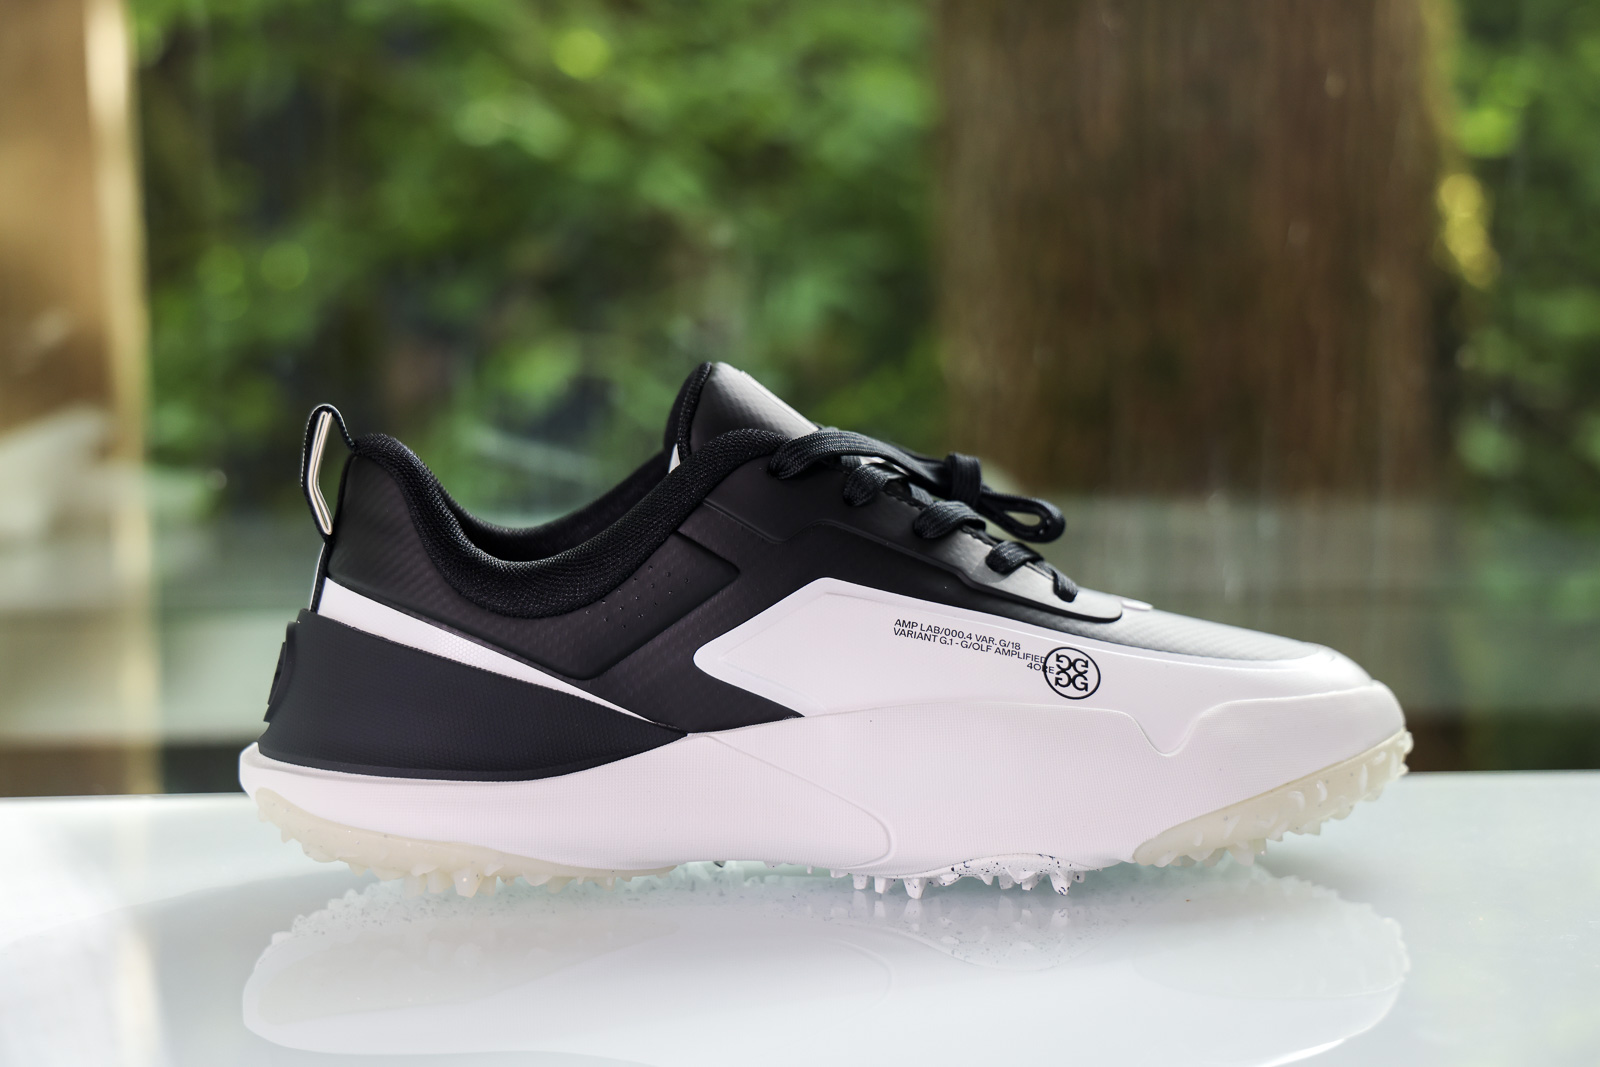 G/FORE G/18 Golf Shoe | Use code "G4BREAKING8010" to save 10%!